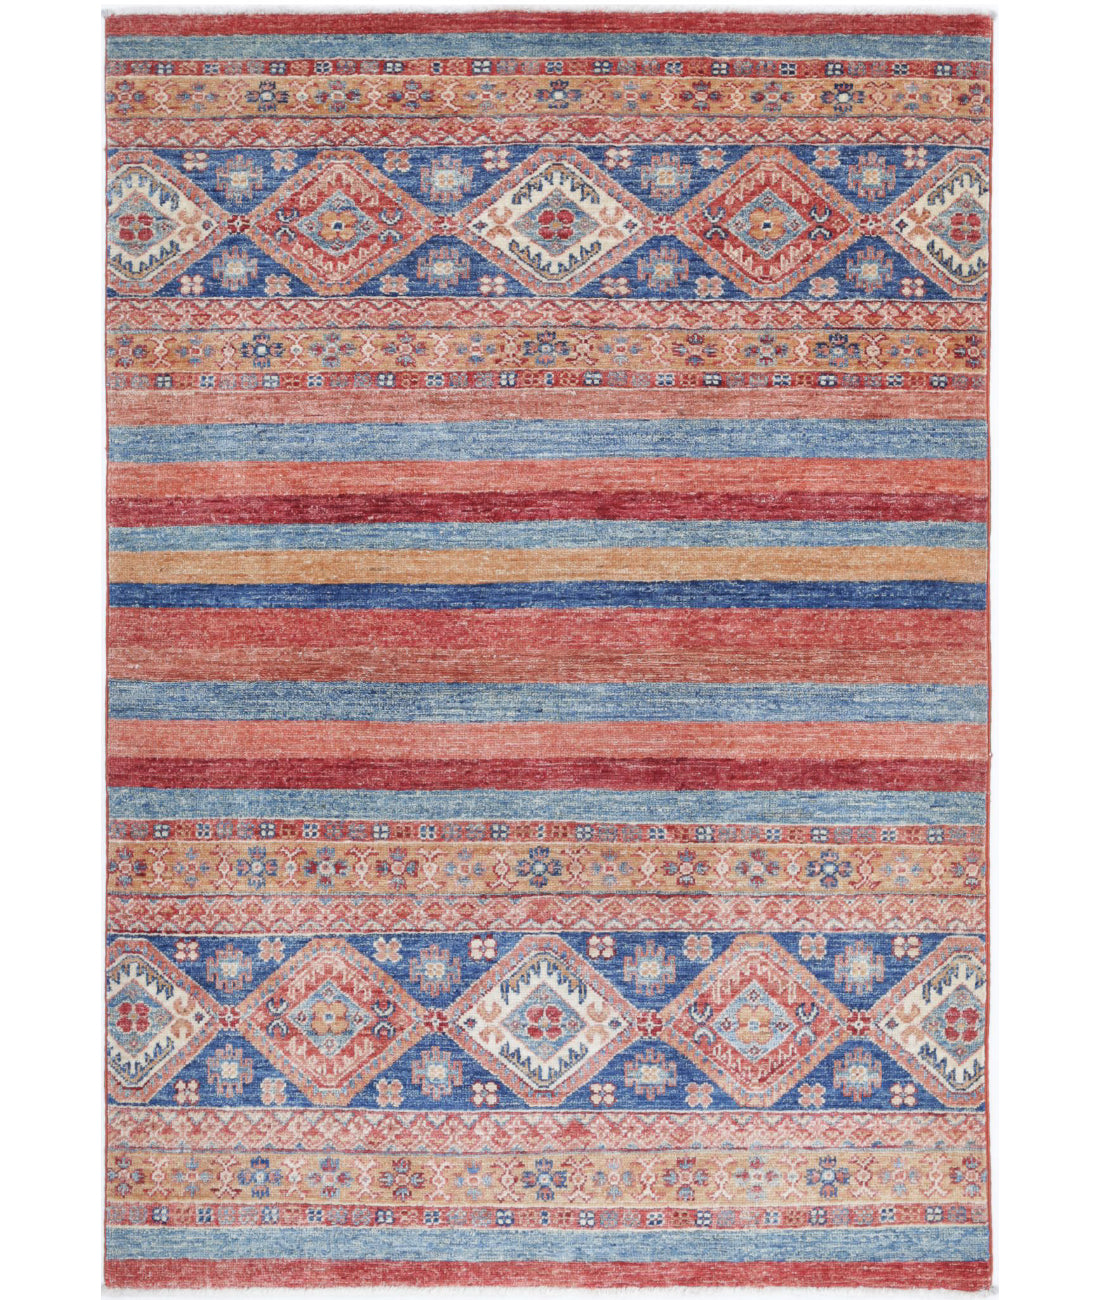 Hand Knotted Khurjeen Wool Rug - 3'4'' x 5'1'' 3'4'' x 5'1'' (100 X 153) / Multi / Multi